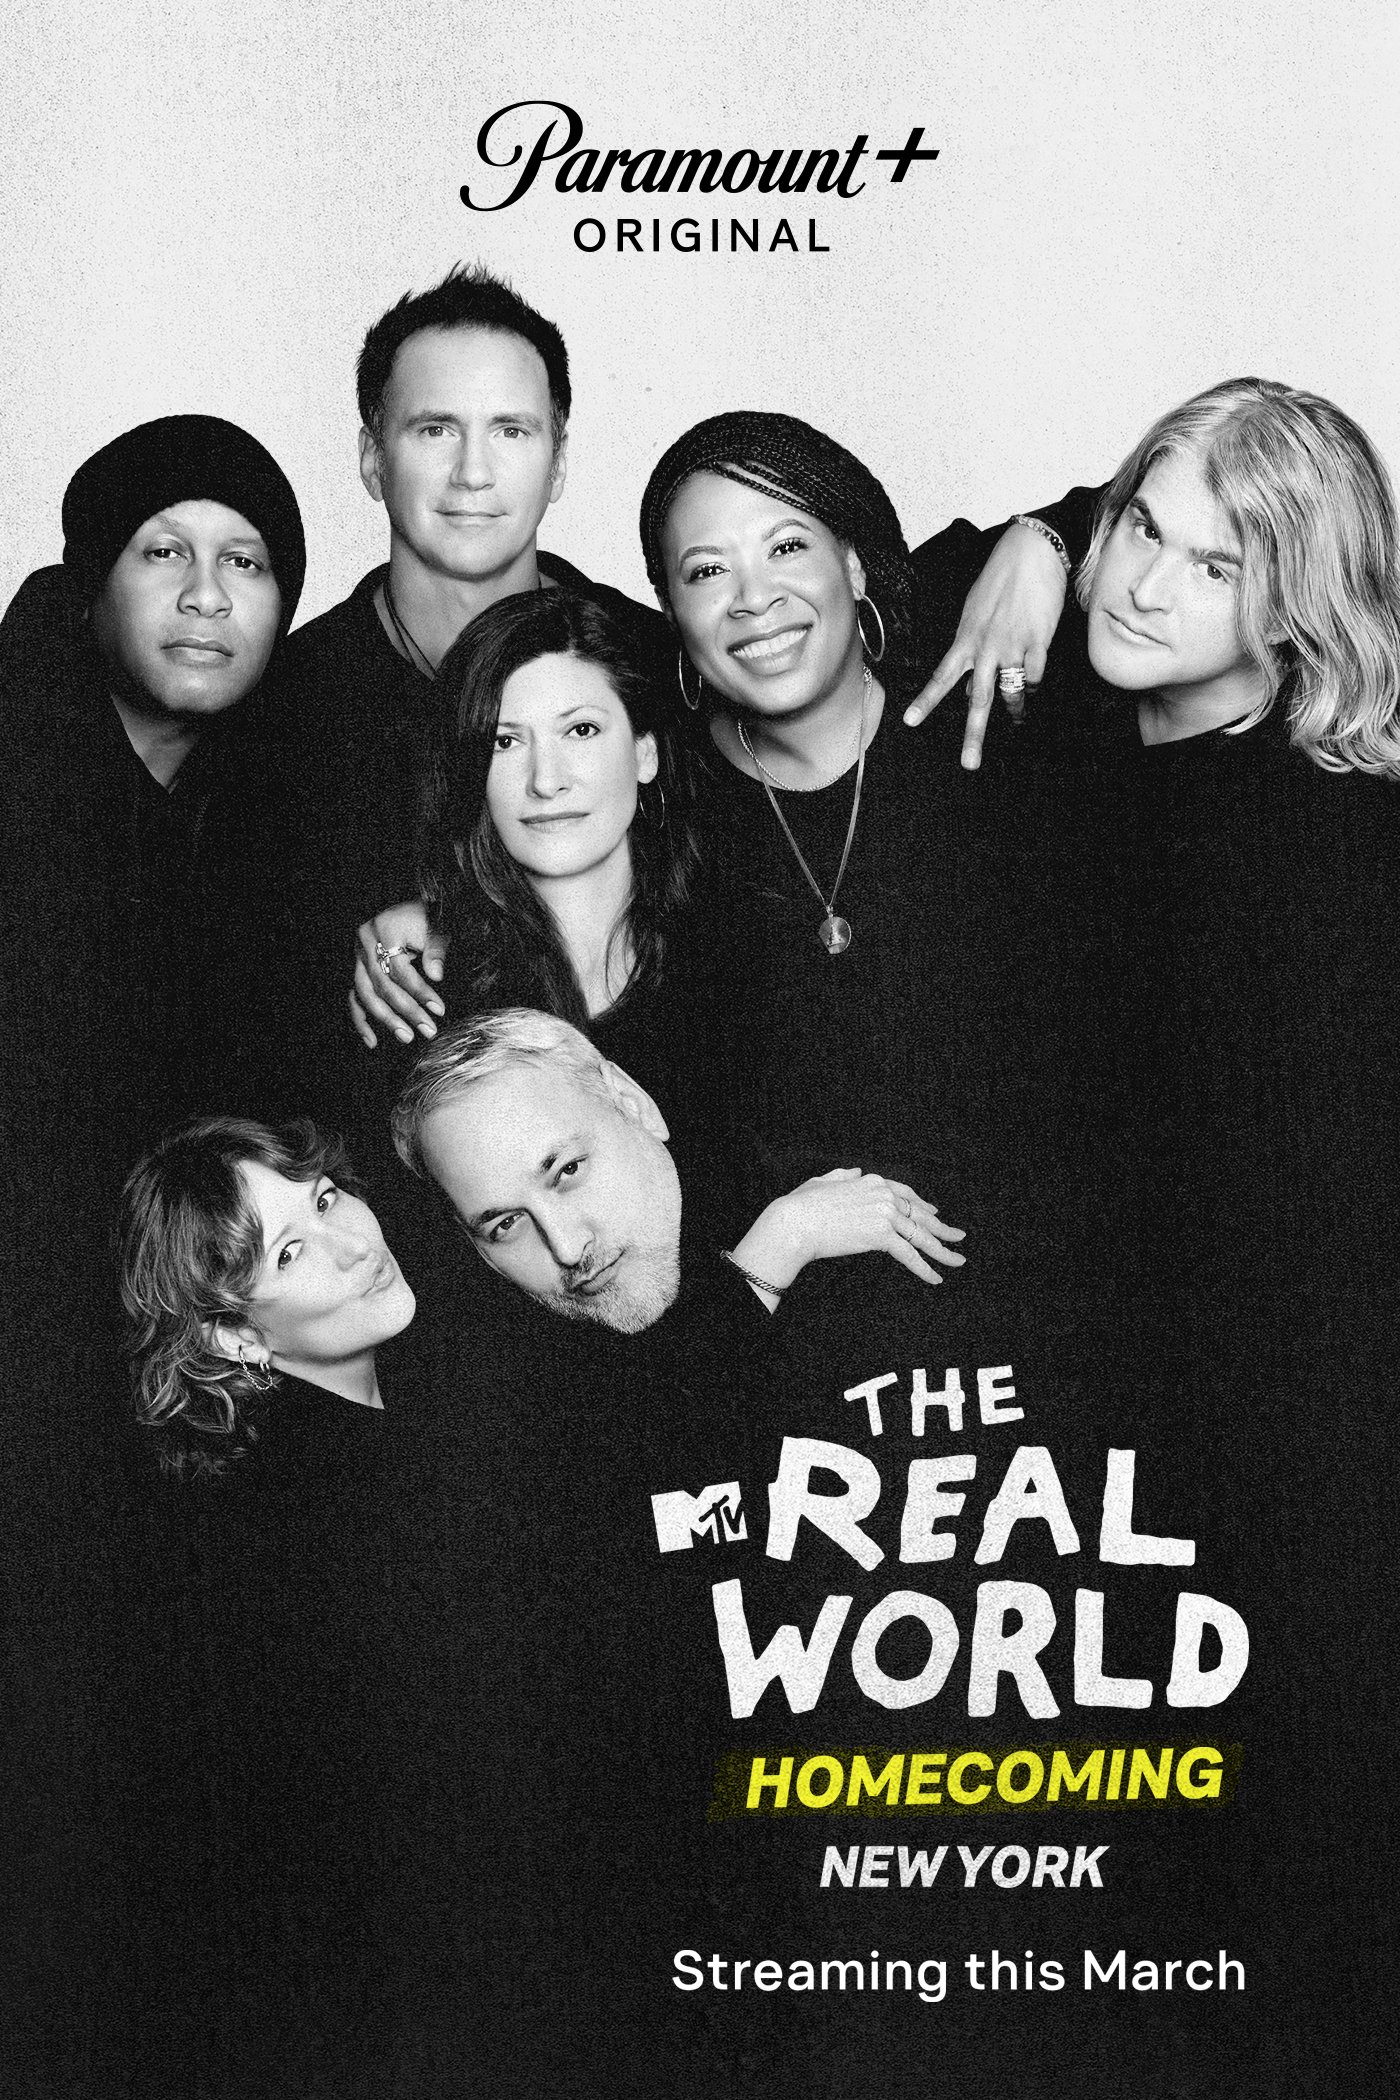 The Real World Homecoming: New York cast